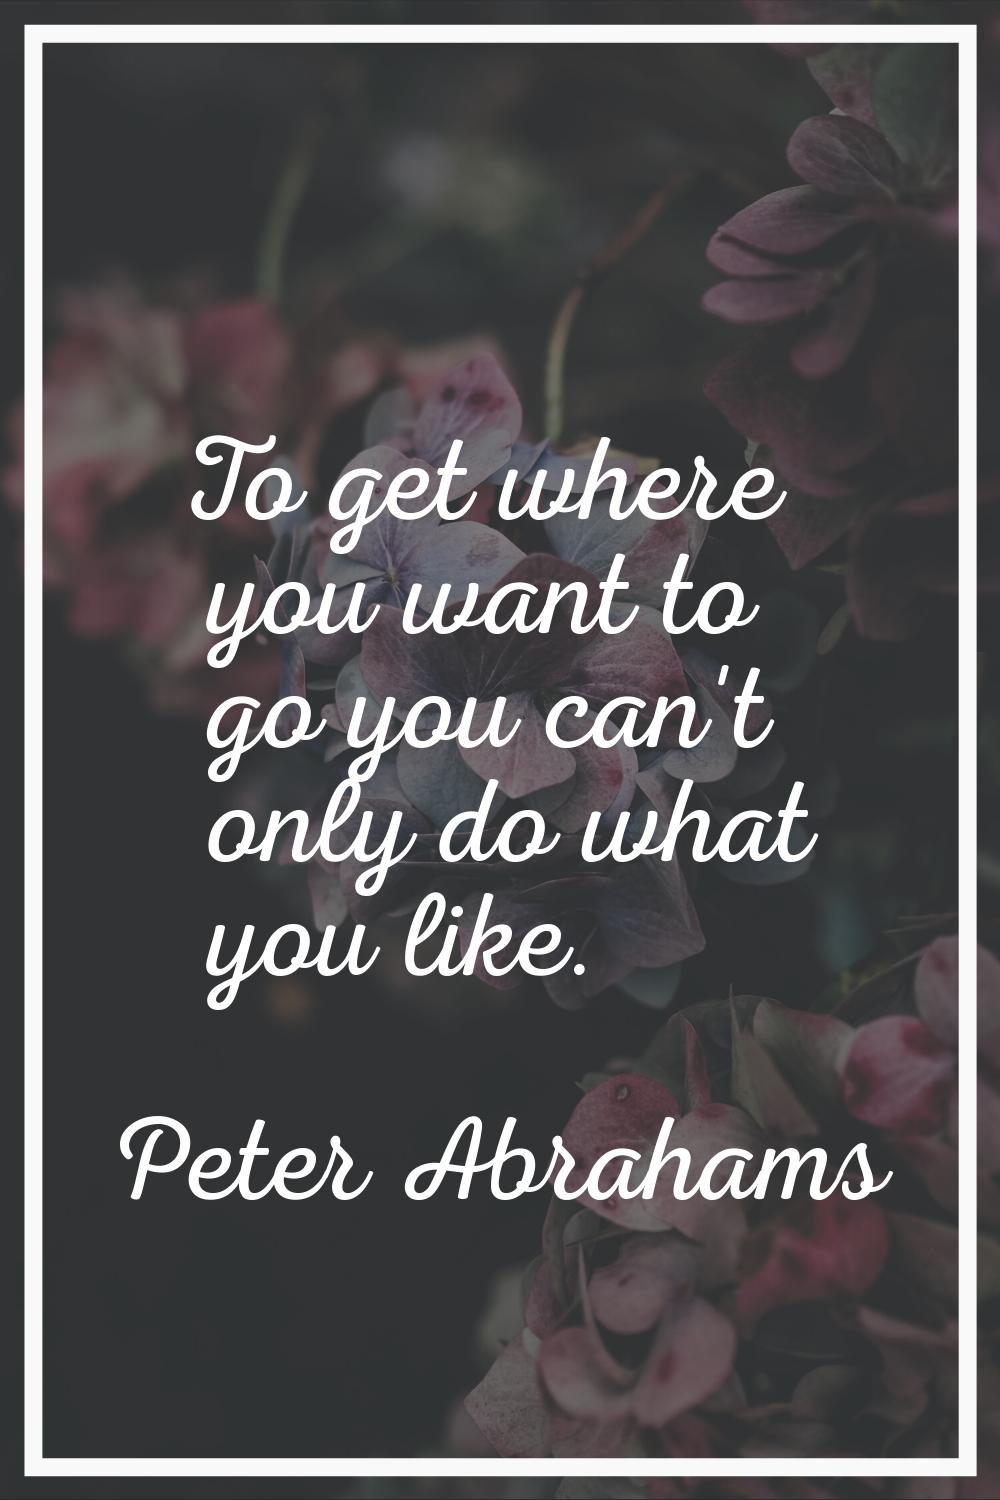 To get where you want to go you can't only do what you like.